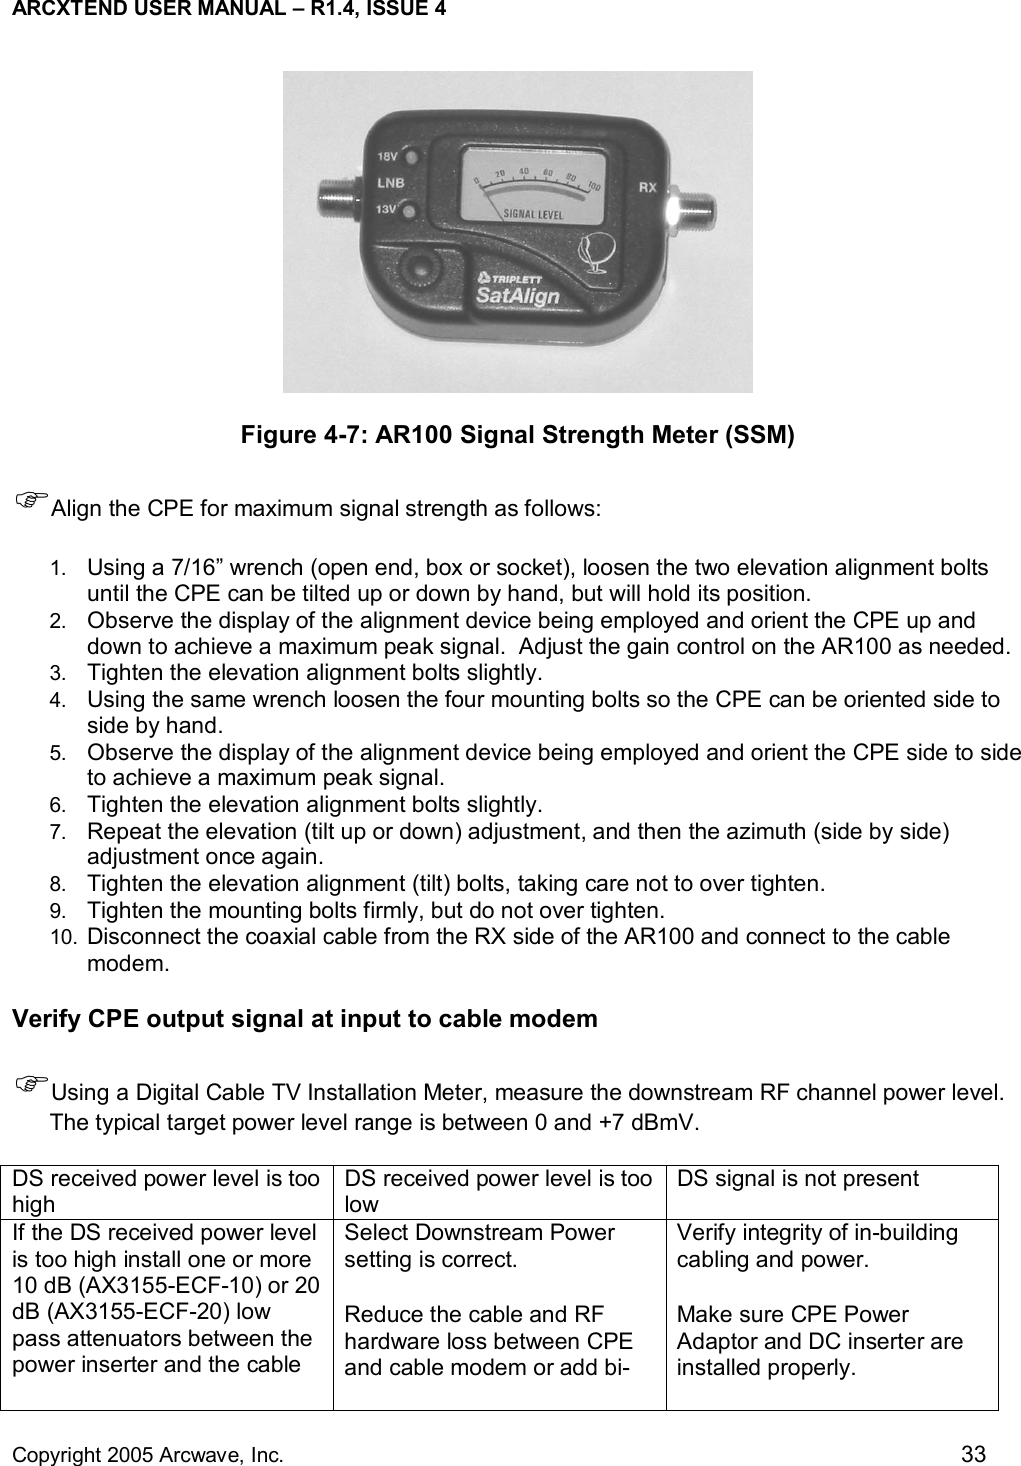 ARCXTEND USER MANUAL – R1.4, ISSUE 4  Copyright 2005 Arcwave, Inc.    33  Figure 4-7: AR100 Signal Strength Meter (SSM) )Align the CPE for maximum signal strength as follows: 1.  Using a 7/16” wrench (open end, box or socket), loosen the two elevation alignment bolts until the CPE can be tilted up or down by hand, but will hold its position.   2.  Observe the display of the alignment device being employed and orient the CPE up and down to achieve a maximum peak signal.  Adjust the gain control on the AR100 as needed. 3.  Tighten the elevation alignment bolts slightly. 4.  Using the same wrench loosen the four mounting bolts so the CPE can be oriented side to side by hand. 5.  Observe the display of the alignment device being employed and orient the CPE side to side to achieve a maximum peak signal. 6.  Tighten the elevation alignment bolts slightly. 7.  Repeat the elevation (tilt up or down) adjustment, and then the azimuth (side by side) adjustment once again. 8.  Tighten the elevation alignment (tilt) bolts, taking care not to over tighten.   9.  Tighten the mounting bolts firmly, but do not over tighten. 10.  Disconnect the coaxial cable from the RX side of the AR100 and connect to the cable modem.  Verify CPE output signal at input to cable modem )Using a Digital Cable TV Installation Meter, measure the downstream RF channel power level. The typical target power level range is between 0 and +7 dBmV.    DS received power level is too high DS received power level is too low DS signal is not present If the DS received power level is too high install one or more 10 dB (AX3155-ECF-10) or 20 dB (AX3155-ECF-20) low pass attenuators between the power inserter and the cable Select Downstream Power setting is correct. Reduce the cable and RF hardware loss between CPE and cable modem or add bi-Verify integrity of in-building cabling and power.  Make sure CPE Power Adaptor and DC inserter are installed properly.  